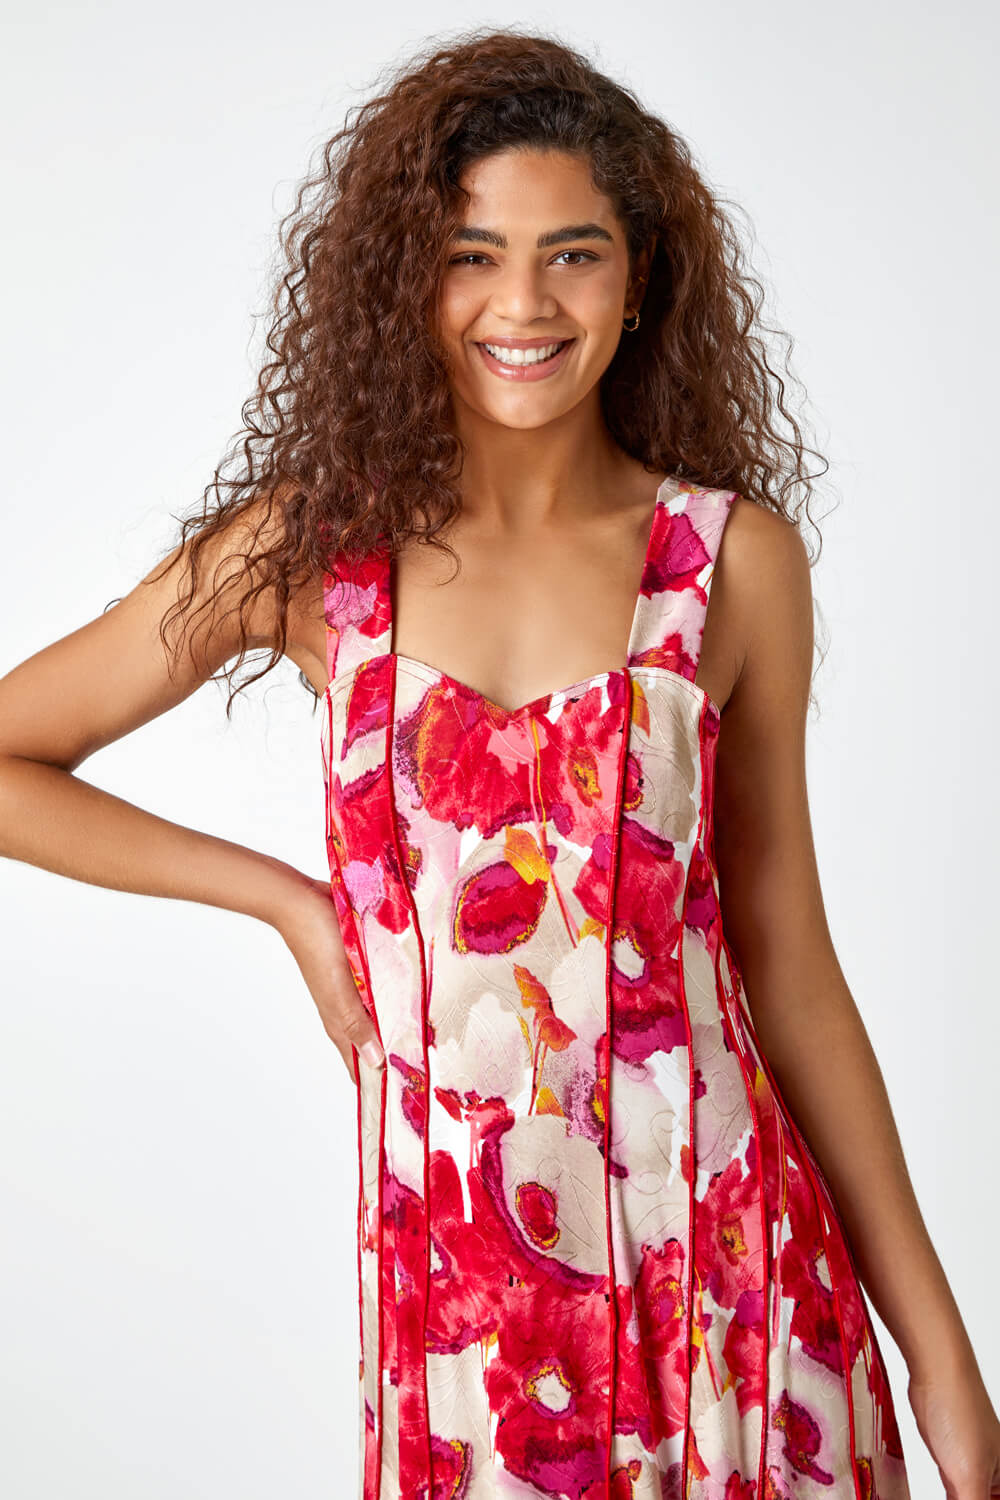 Red Floral Printed Panel Dress, Image 4 of 6